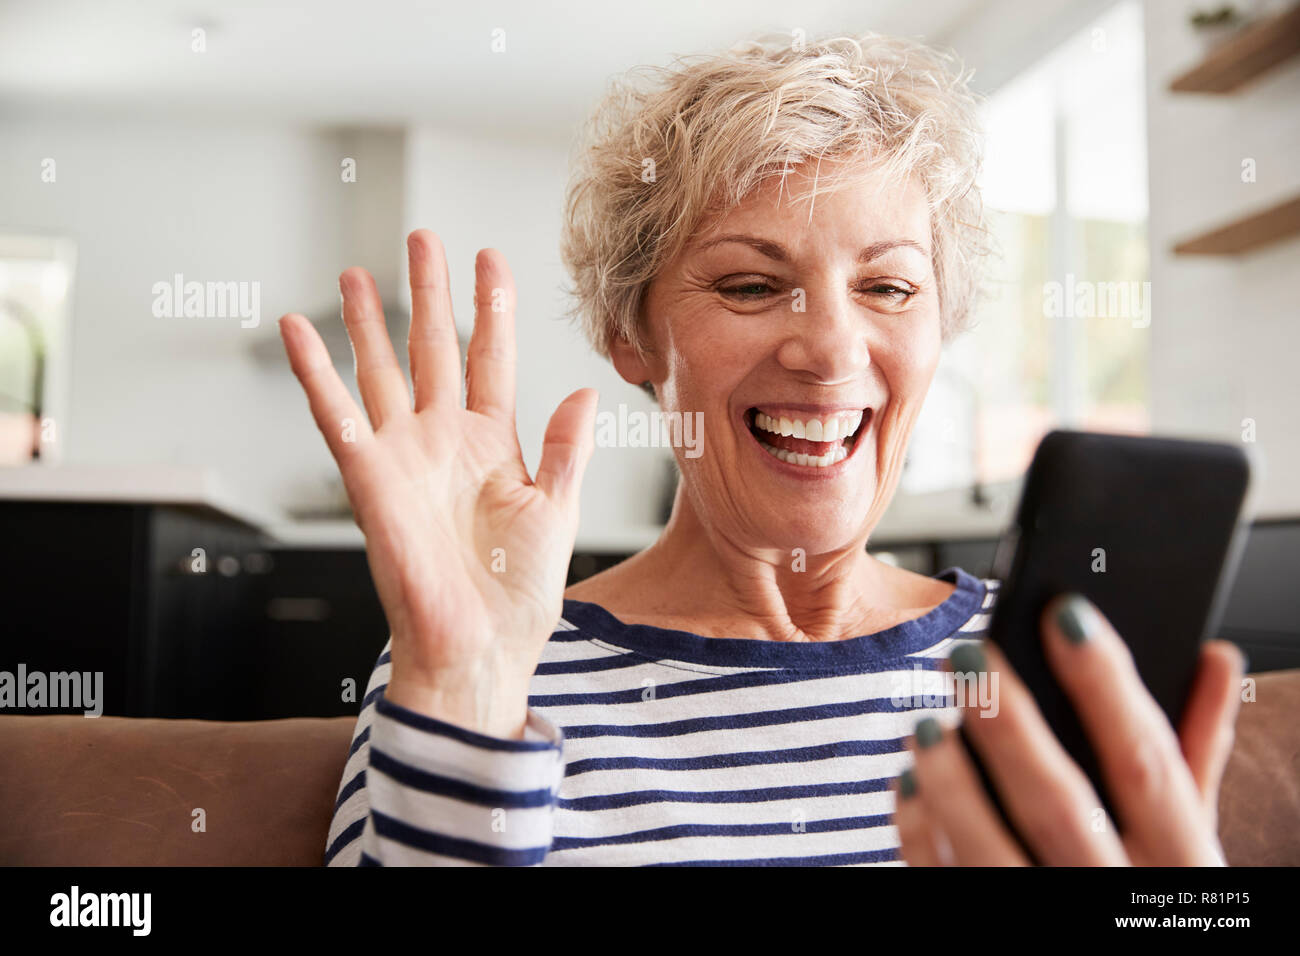 Senior woman video calling on smartphone at home, close up Stock Photo